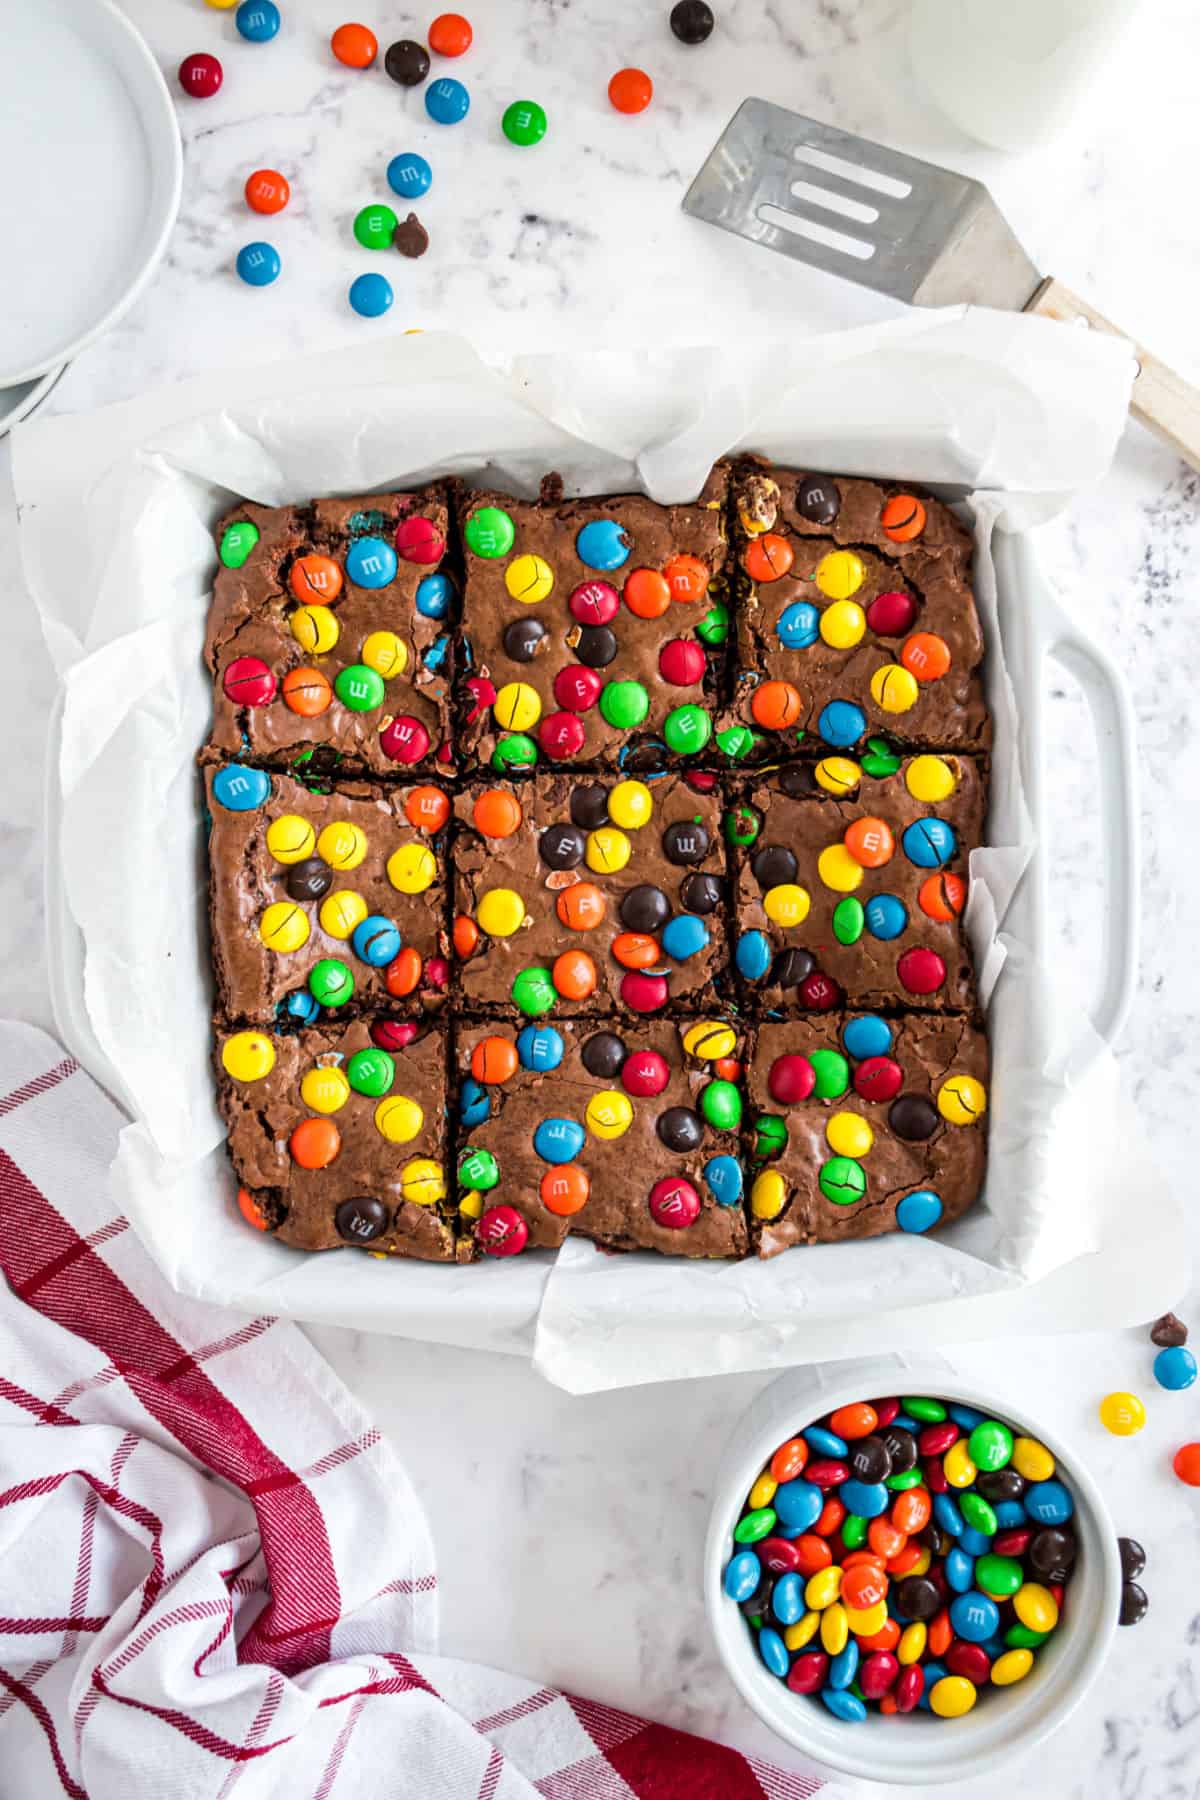 M&M'S USA - We know, you never thought M&M'S Fudge Brownie could